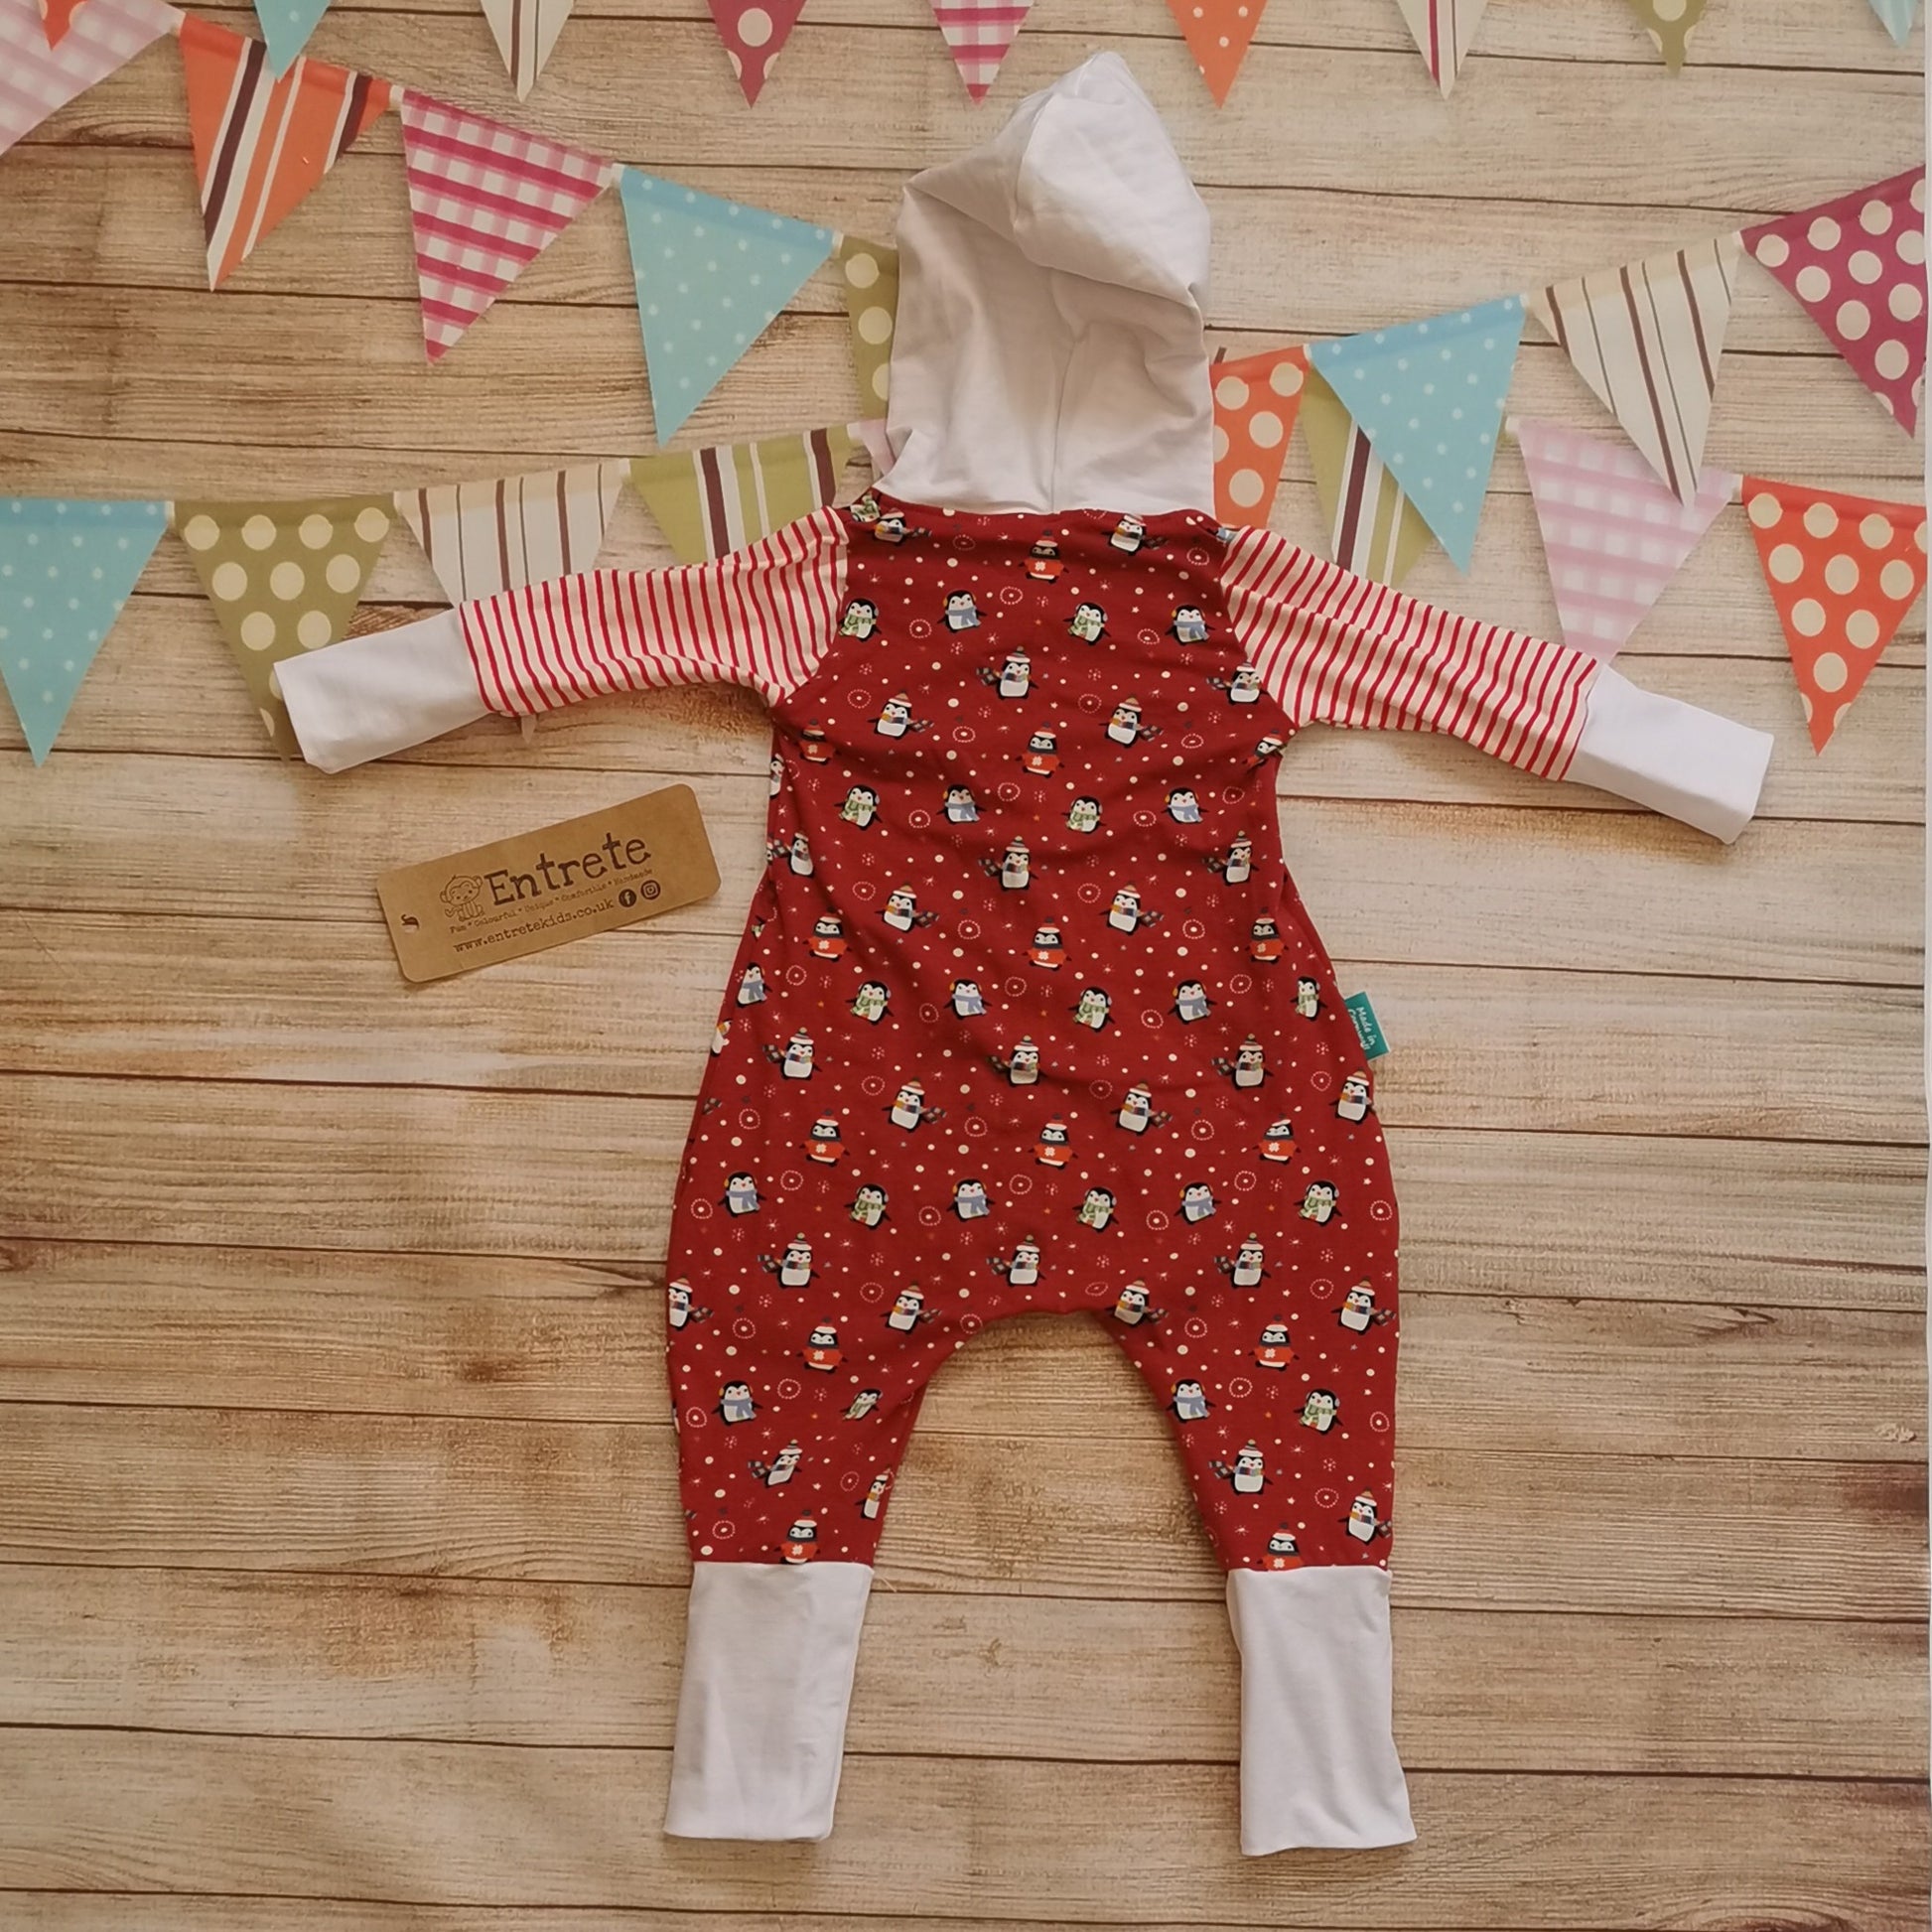 Rear of the epic christmas penguins hooded popper romper. Handmade using red penguins, red striped and white cotton jerseys for the perfect Christmas loungewear!